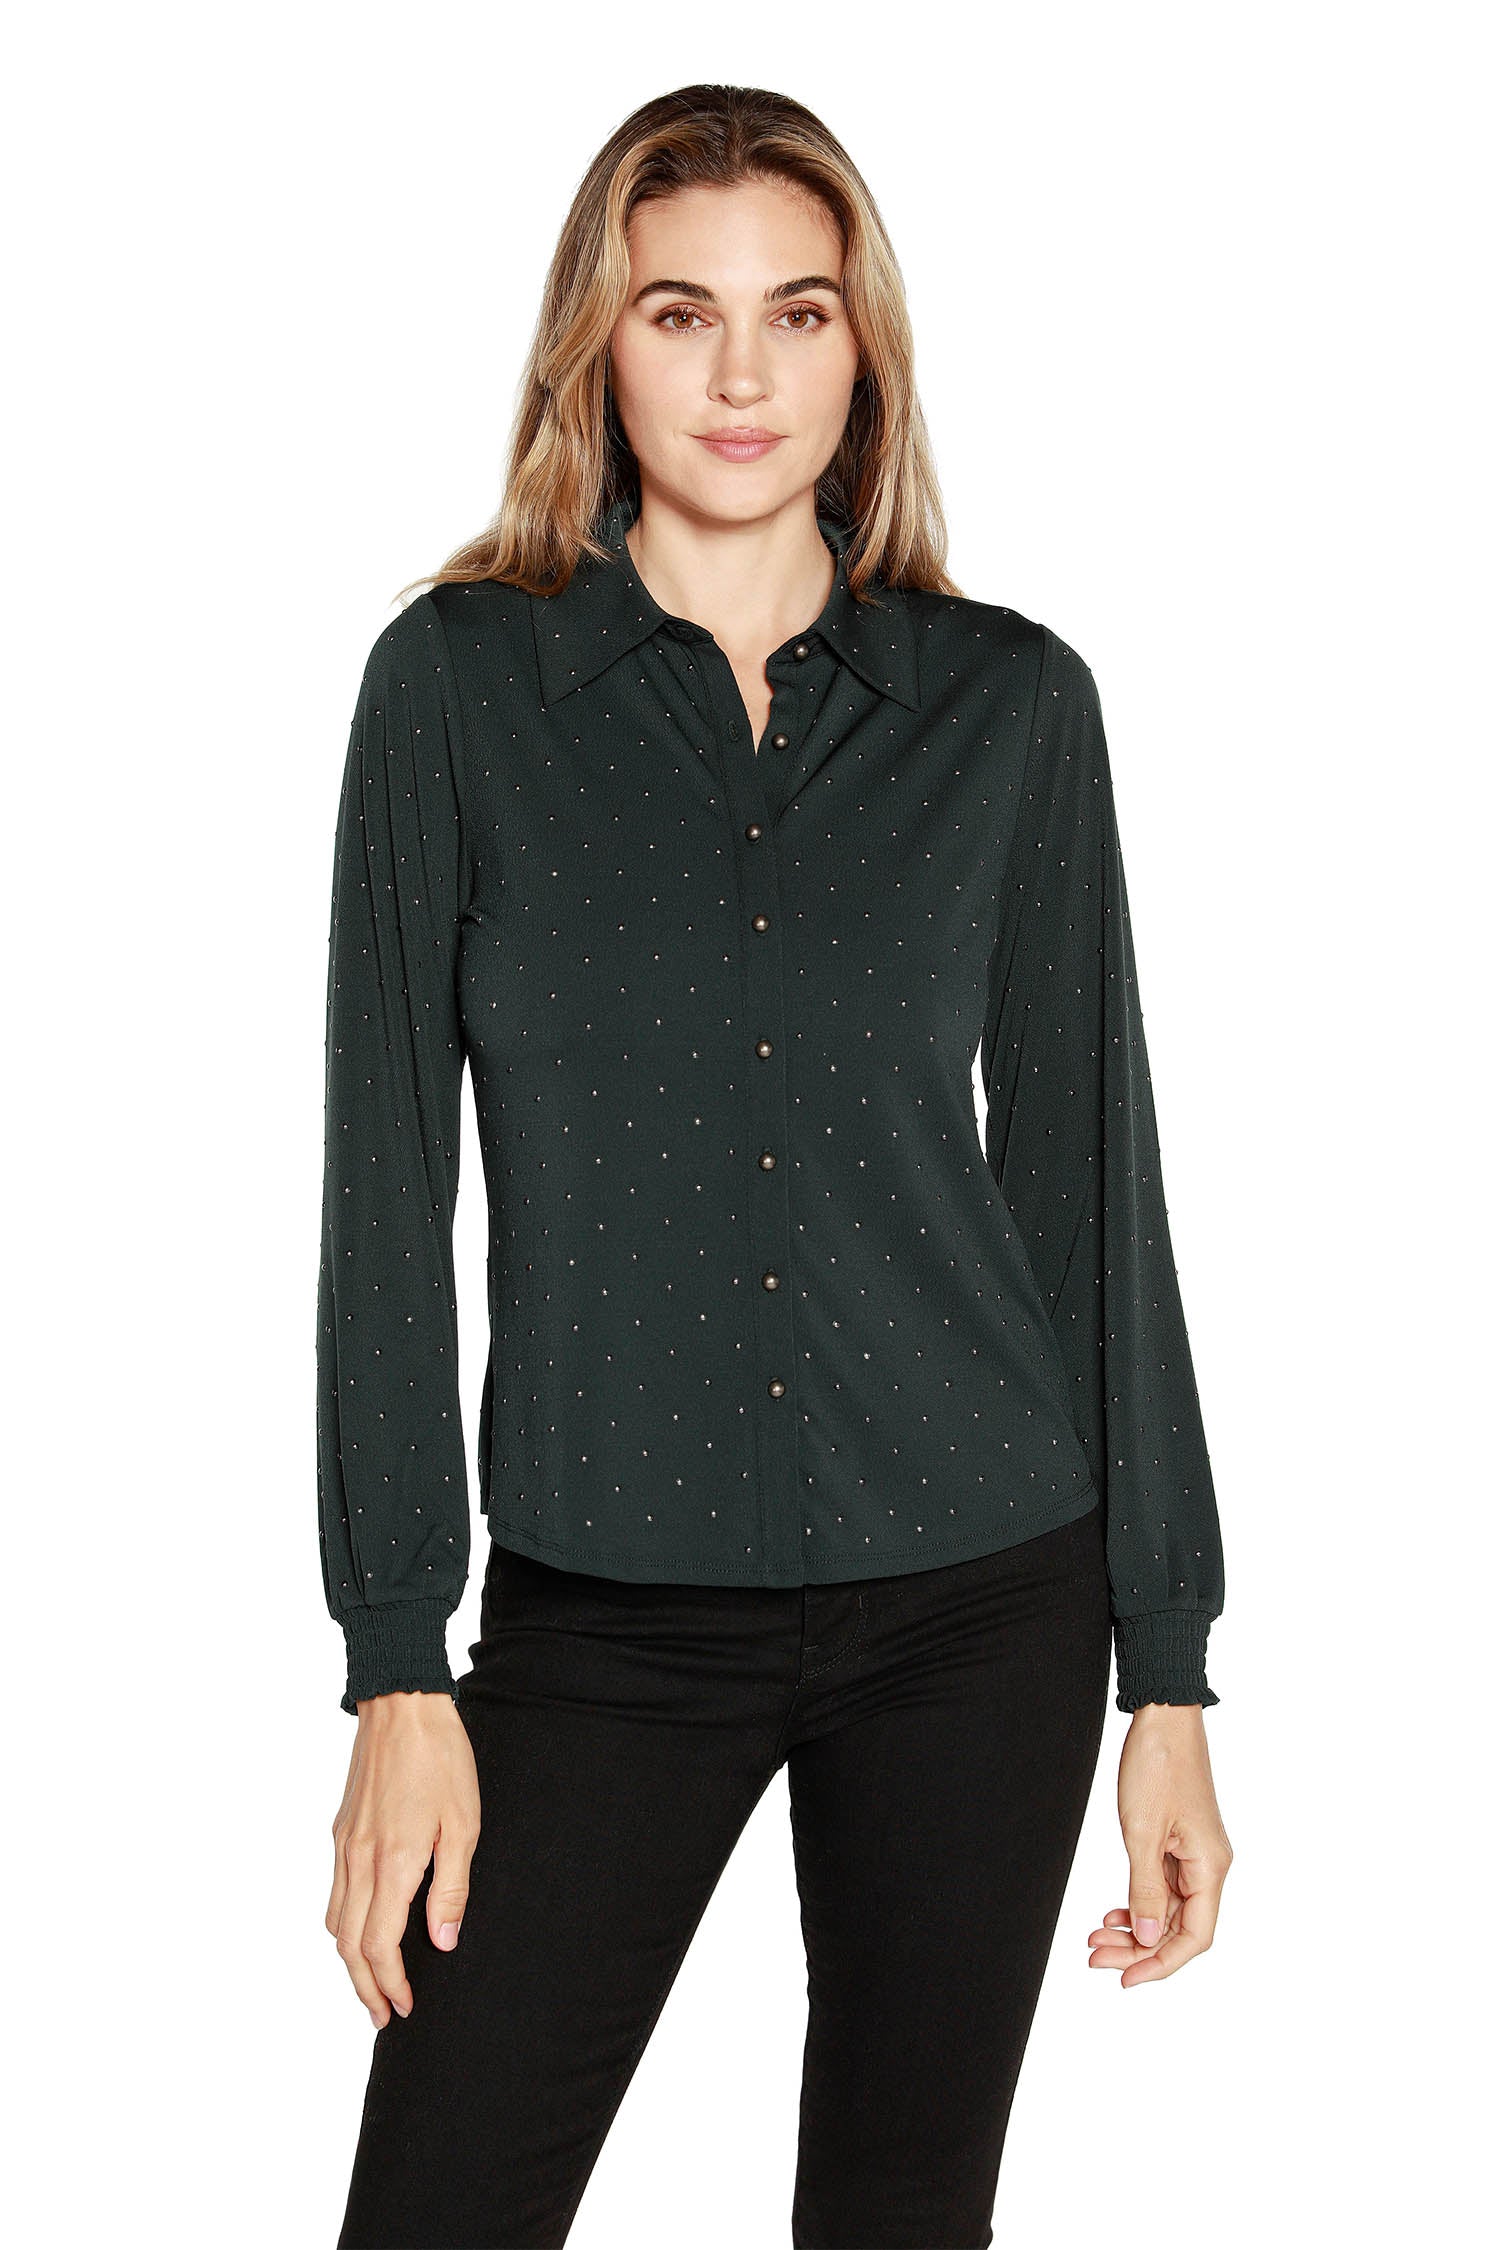 Women's Button Front Blouse with Long Blouson Sleeves in a Metallic Gel Print Jersey